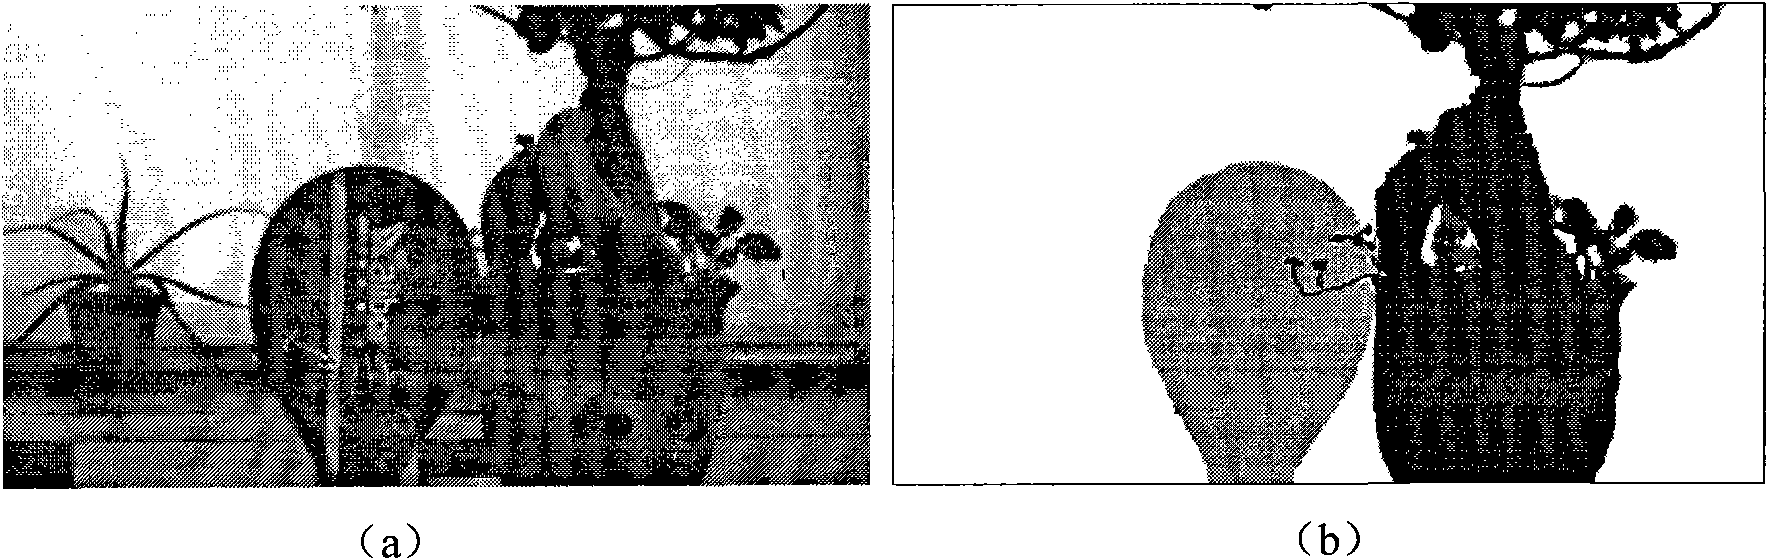 Method for generating virtual multi-viewpoint images based on depth image layering